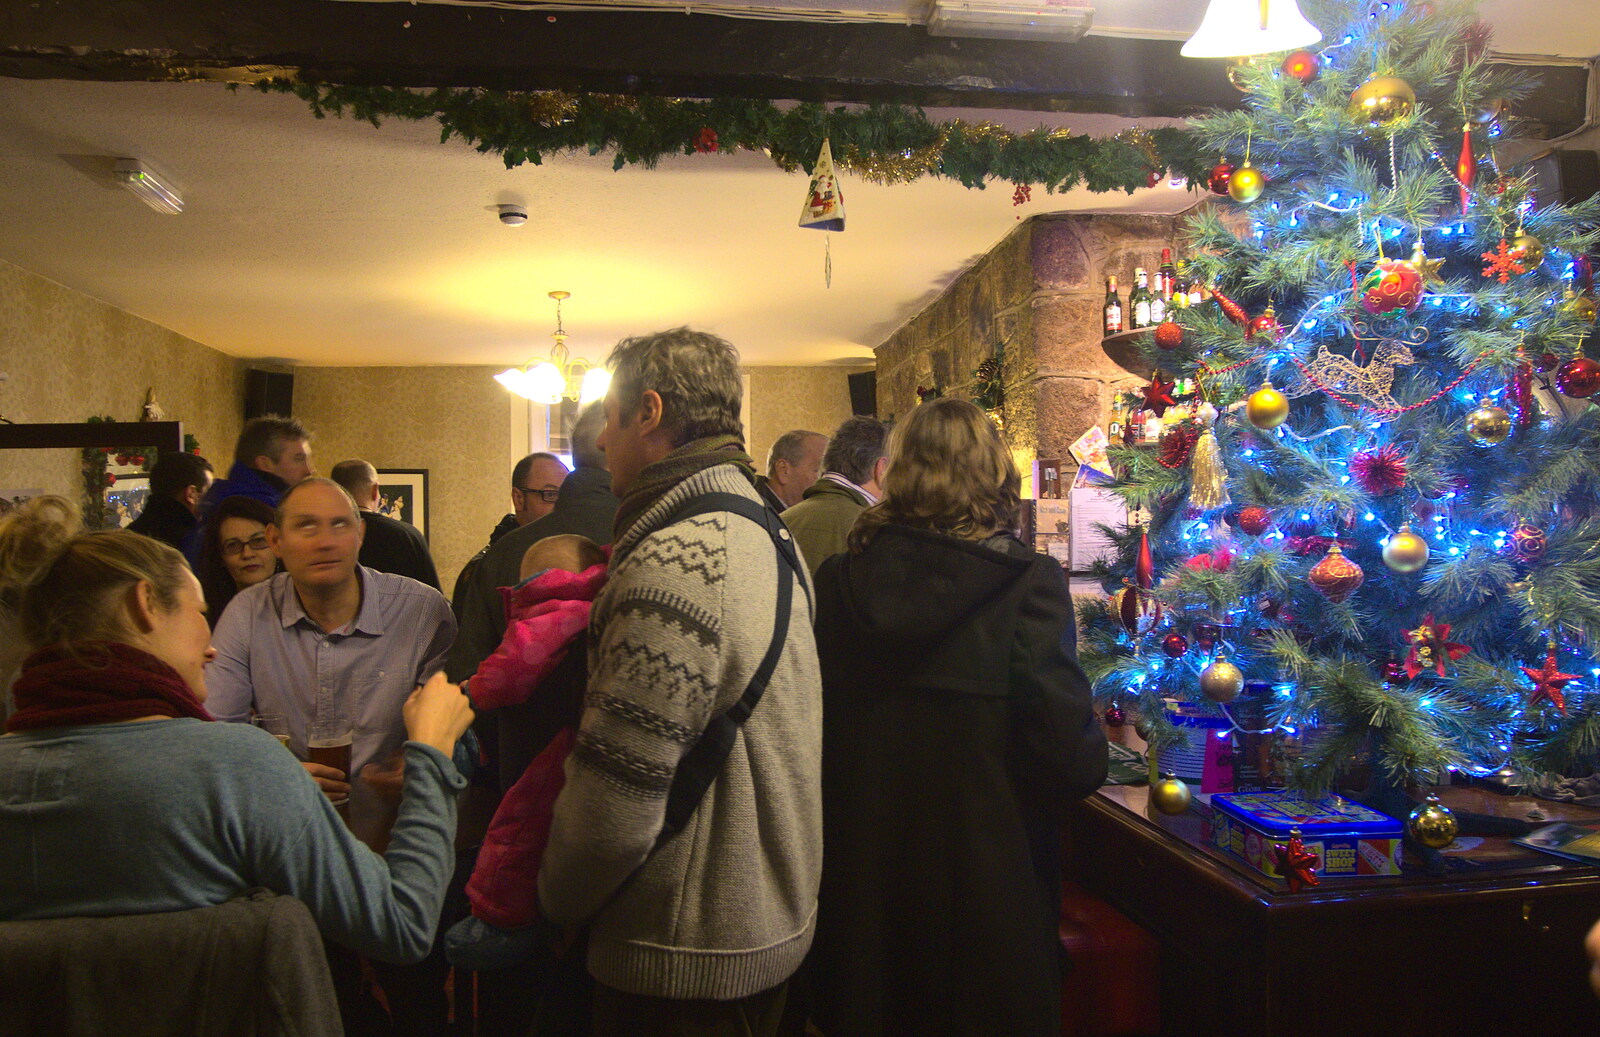 A festive scene inside the Three Crowns  from The Boxing Day Hunt, Chagford, Devon - 26th December 2012